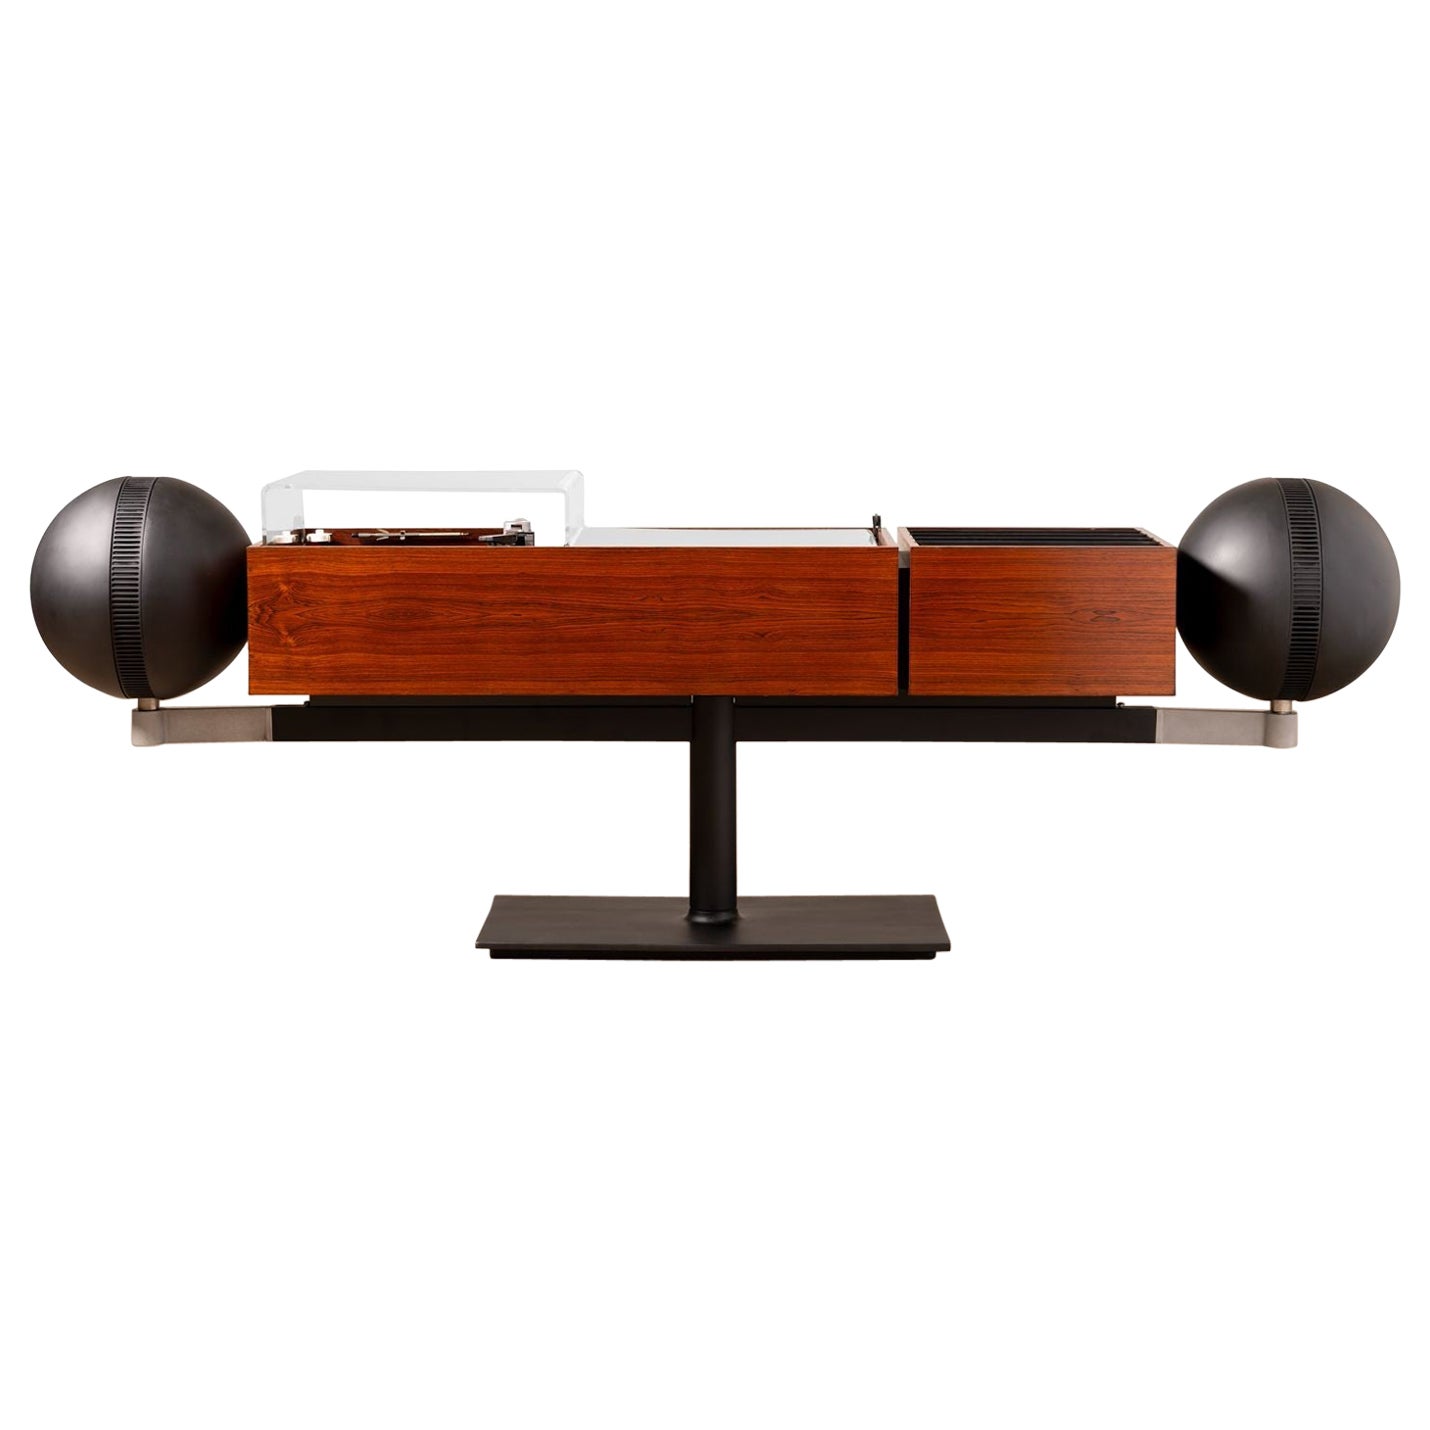 Clairtone Project G2 Rosewood T10 Console Stereo System & Turntable by Al Faux